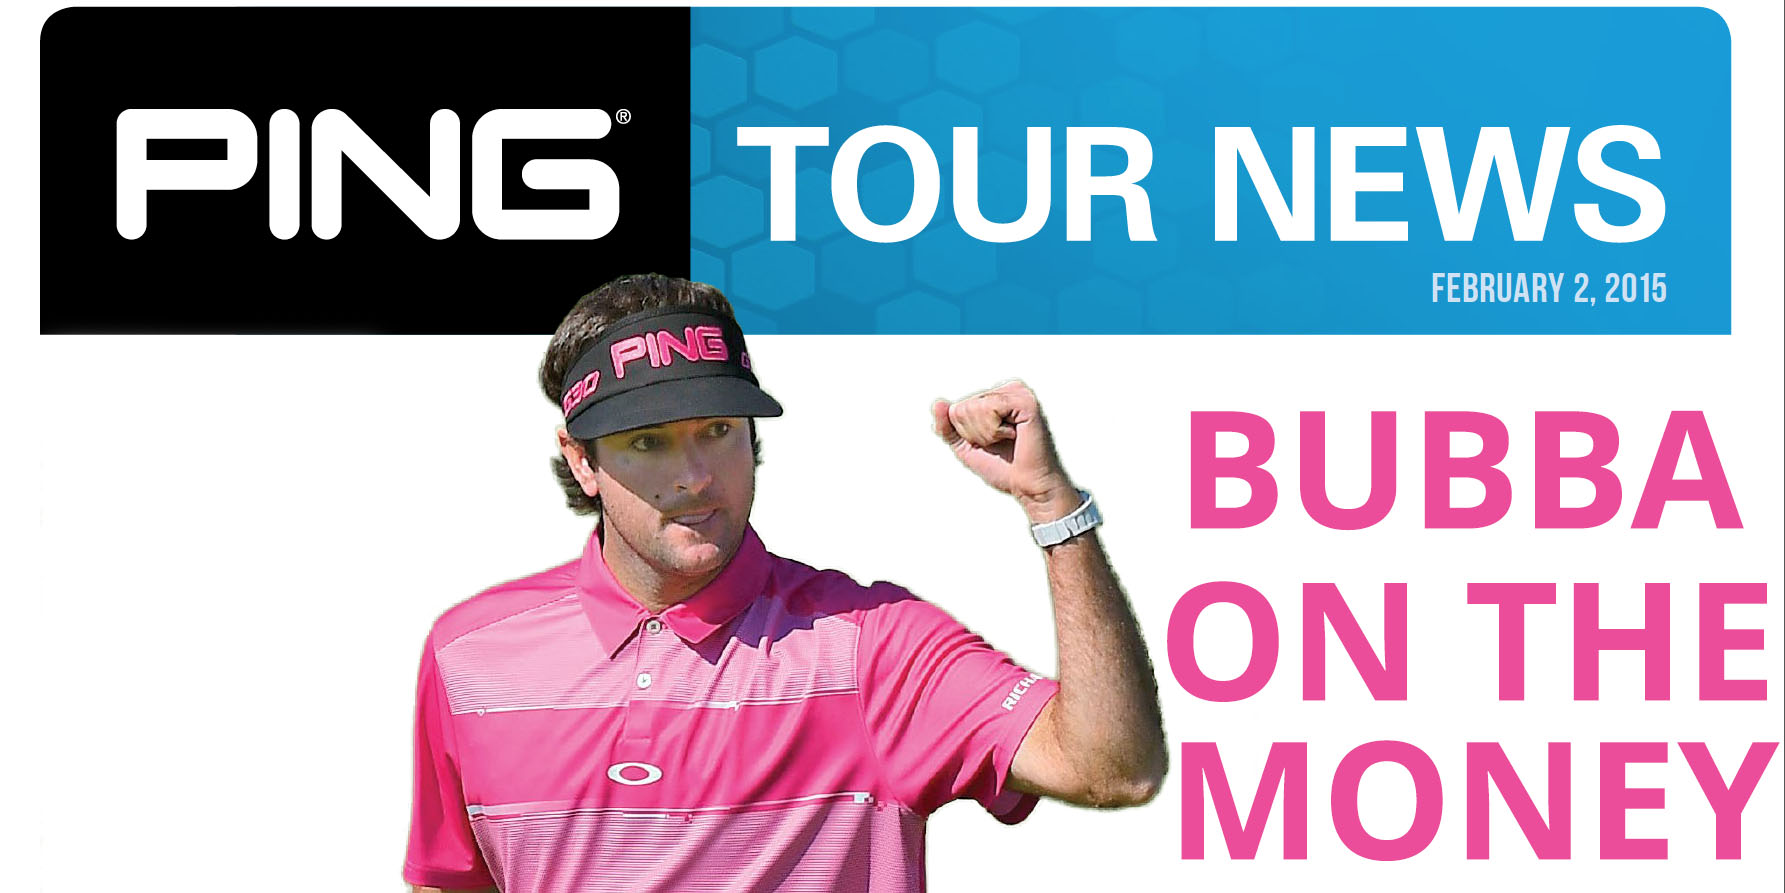 PING Tour News: Week of February 2, 2015